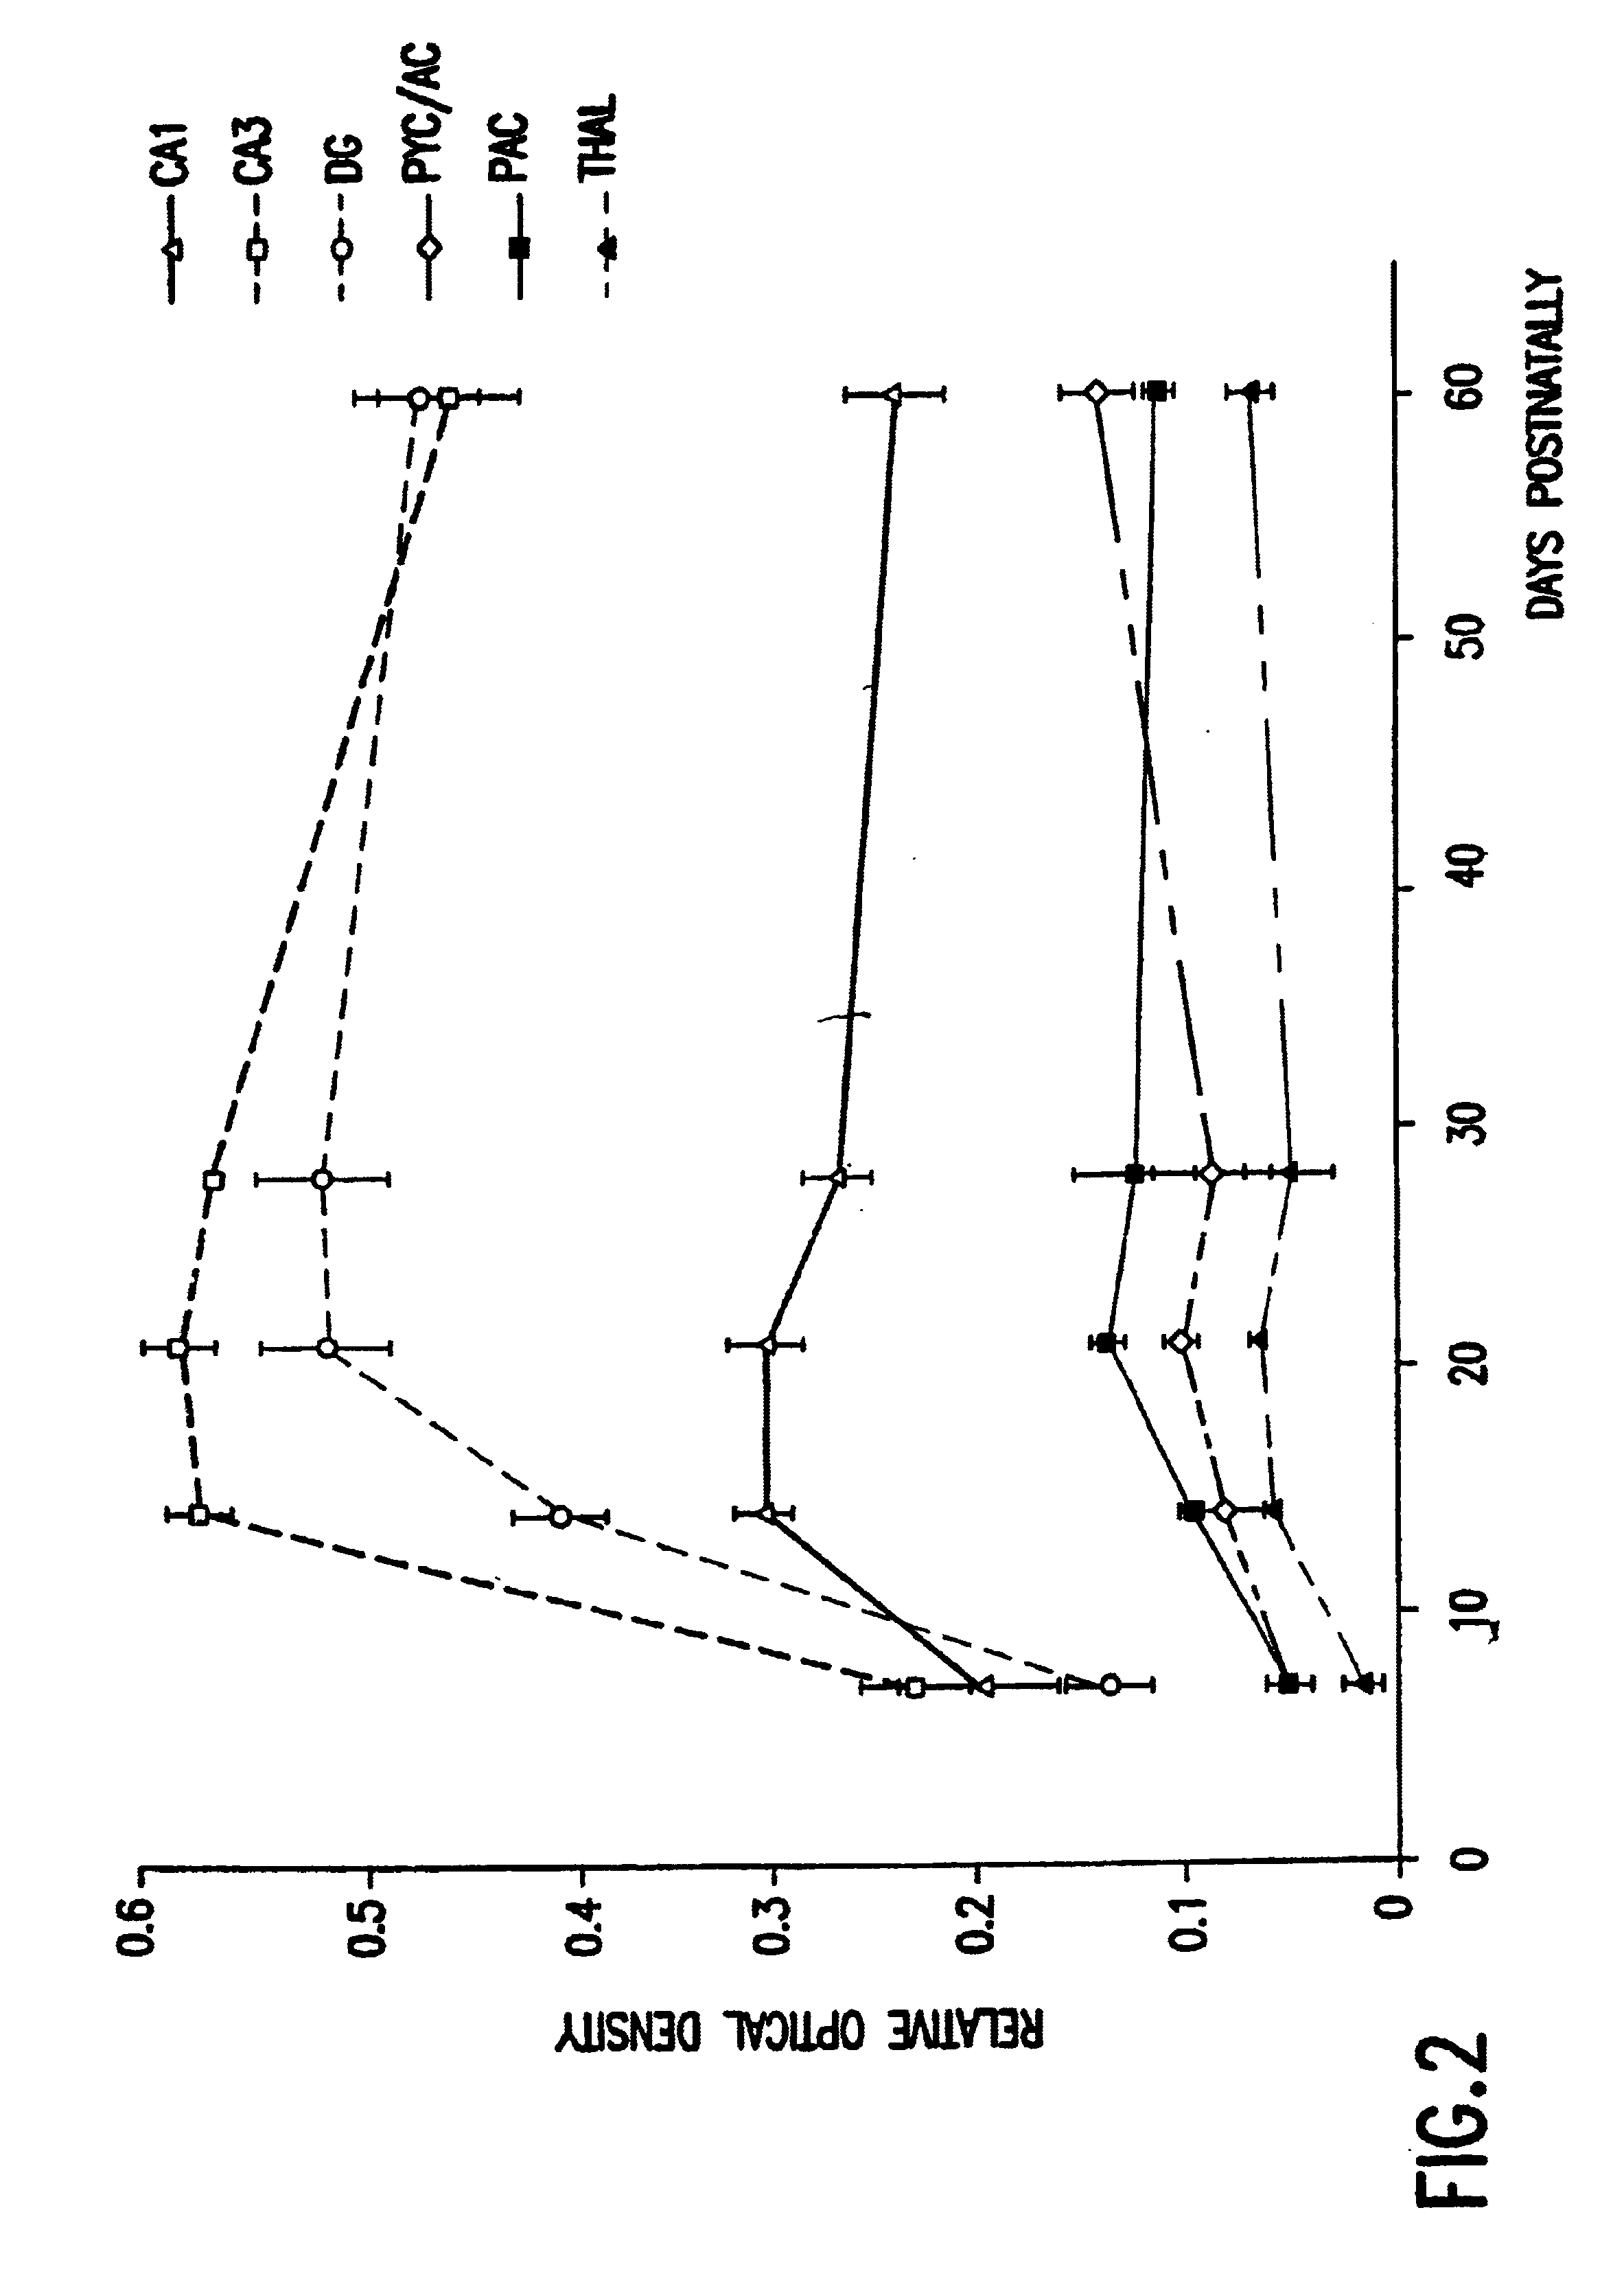 Transgenic mouse expressing the human cyclooxygenase-2 gene and neuronal cell cultures derived therefrom